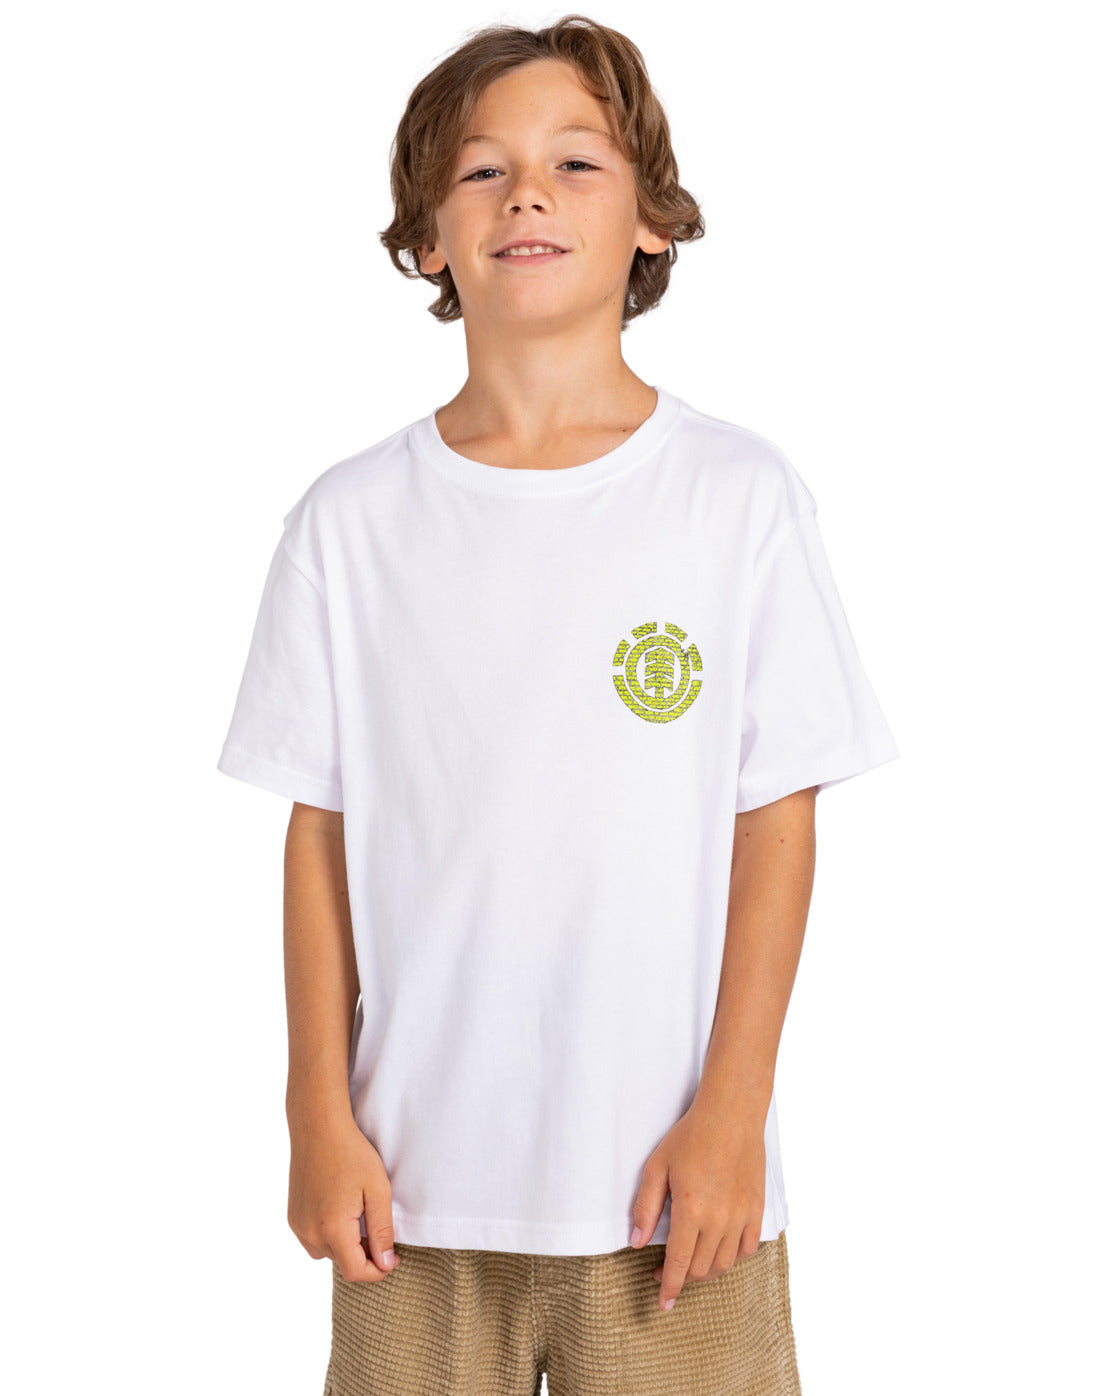 ELEMENT - WILD & FAST SS YOUTH TEE - OPTIC WHITE